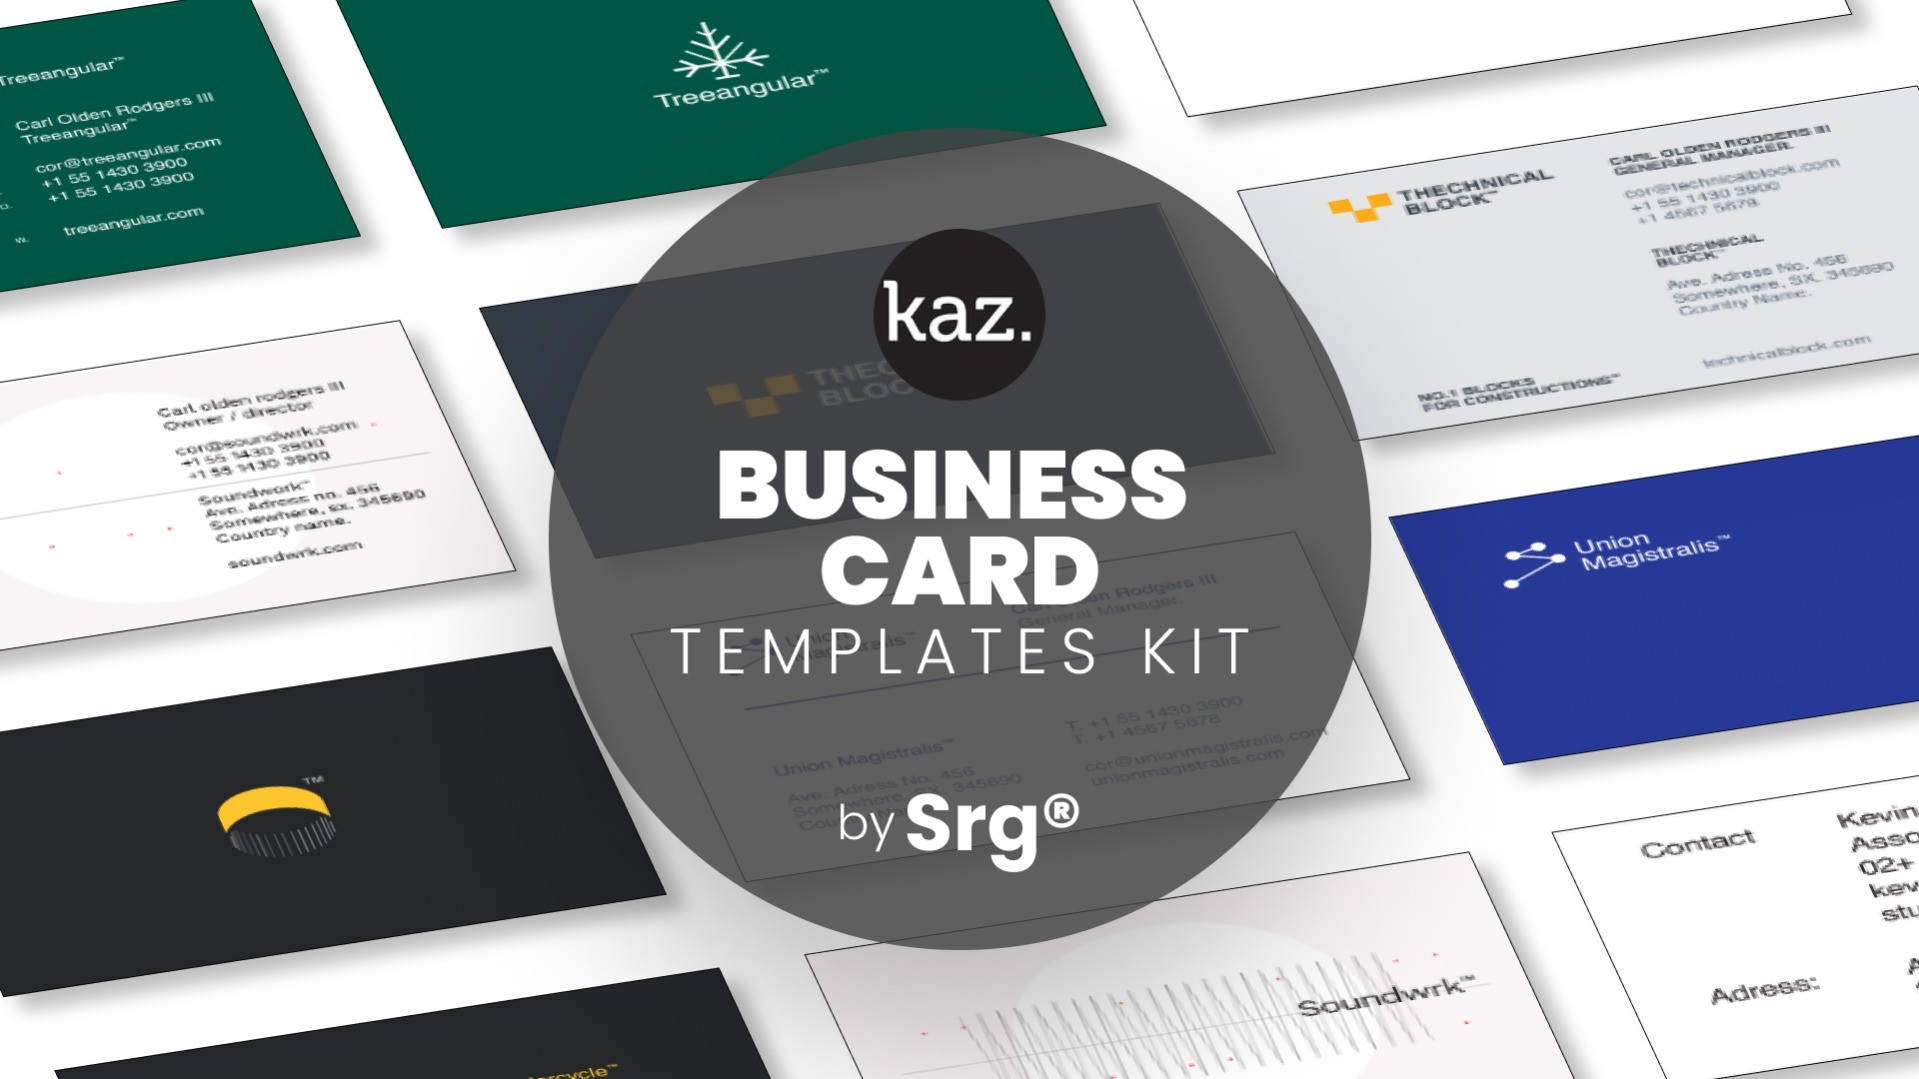 Business Card Templates Kit by Srg®